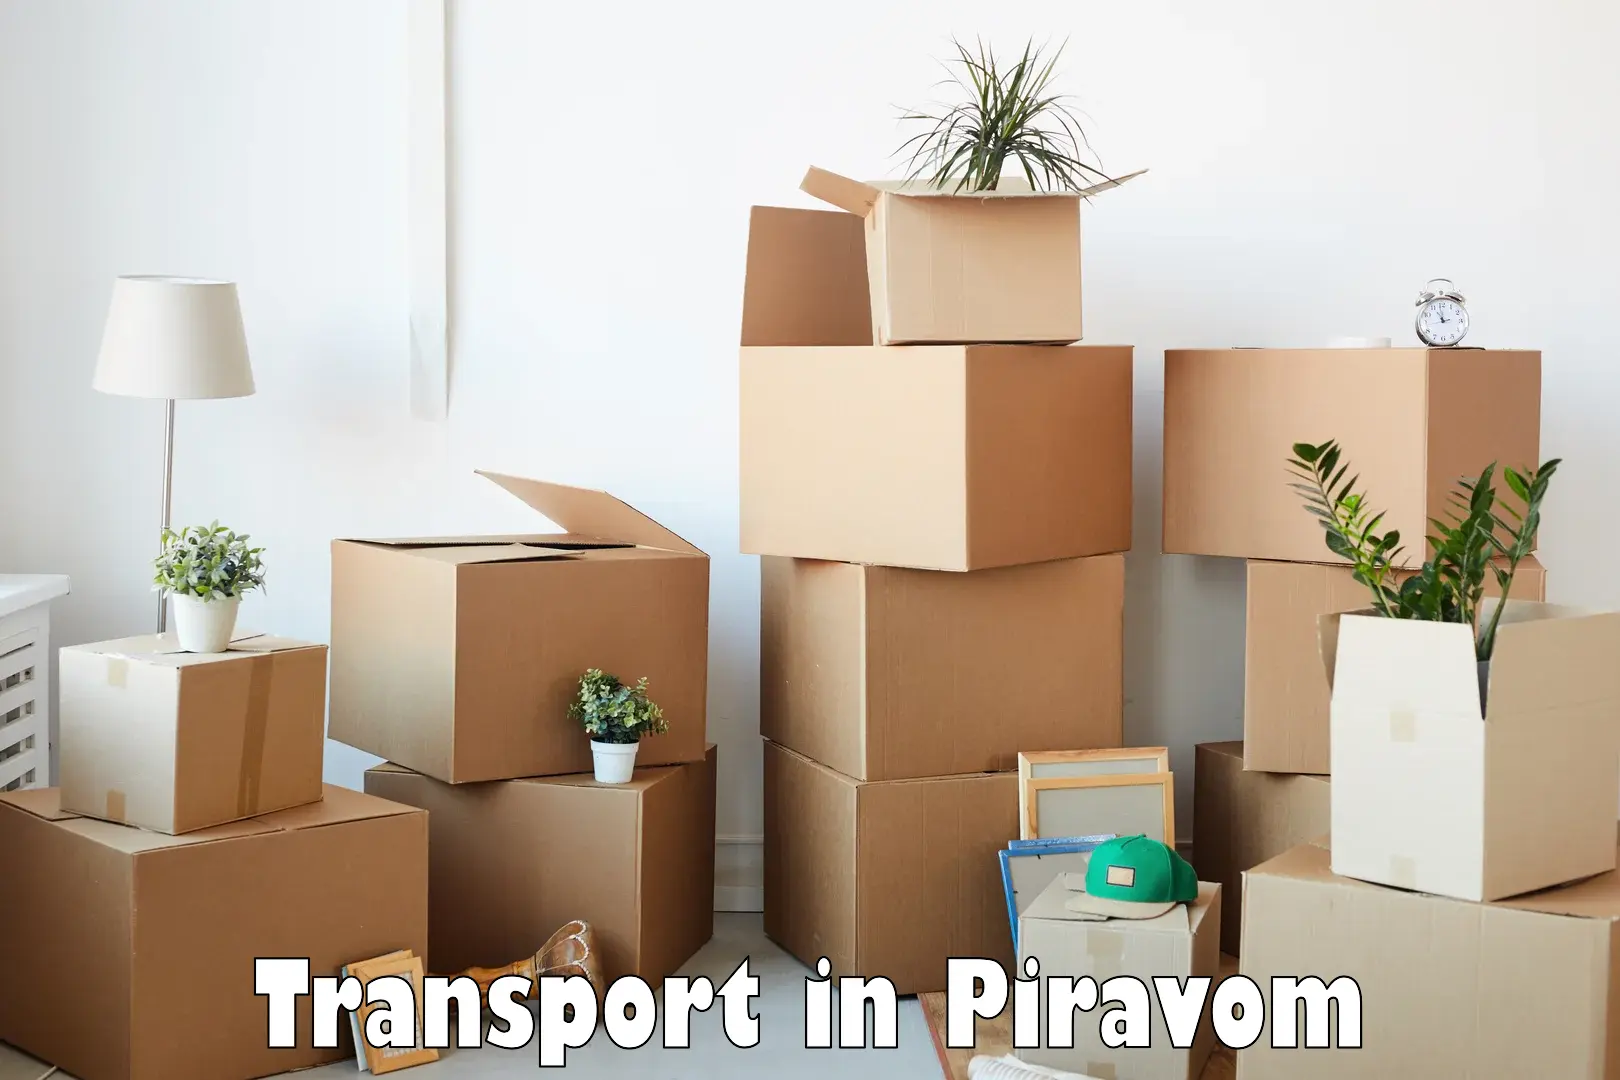 Daily parcel service transport in Piravom